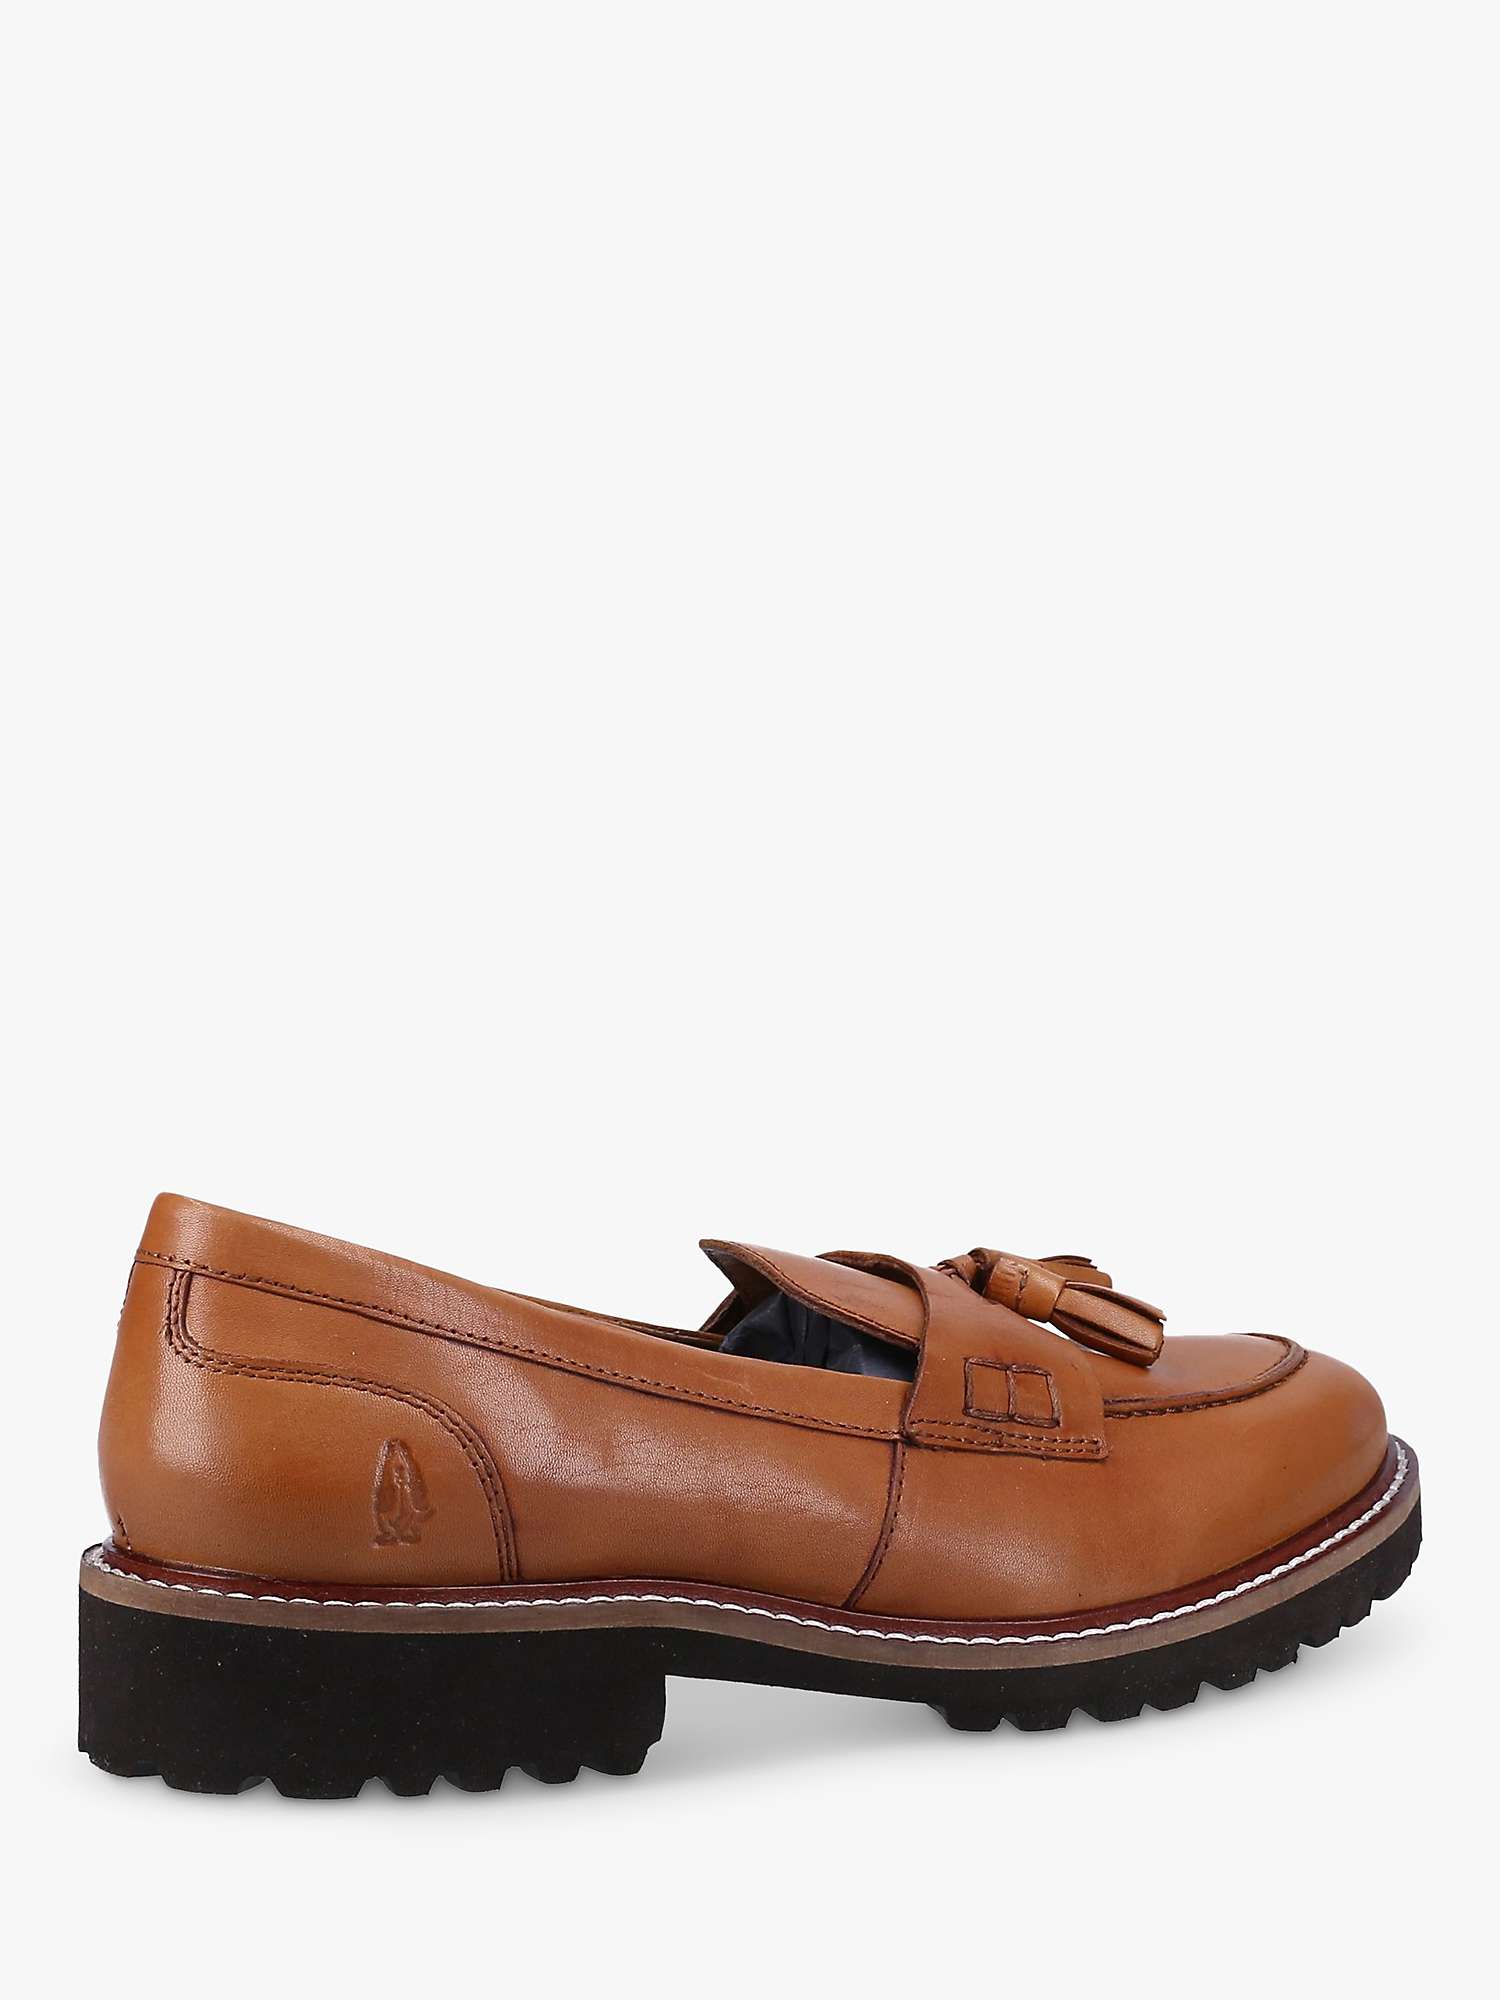 Buy Hush Puppies Ginny Leather Loafers, Tan Online at johnlewis.com